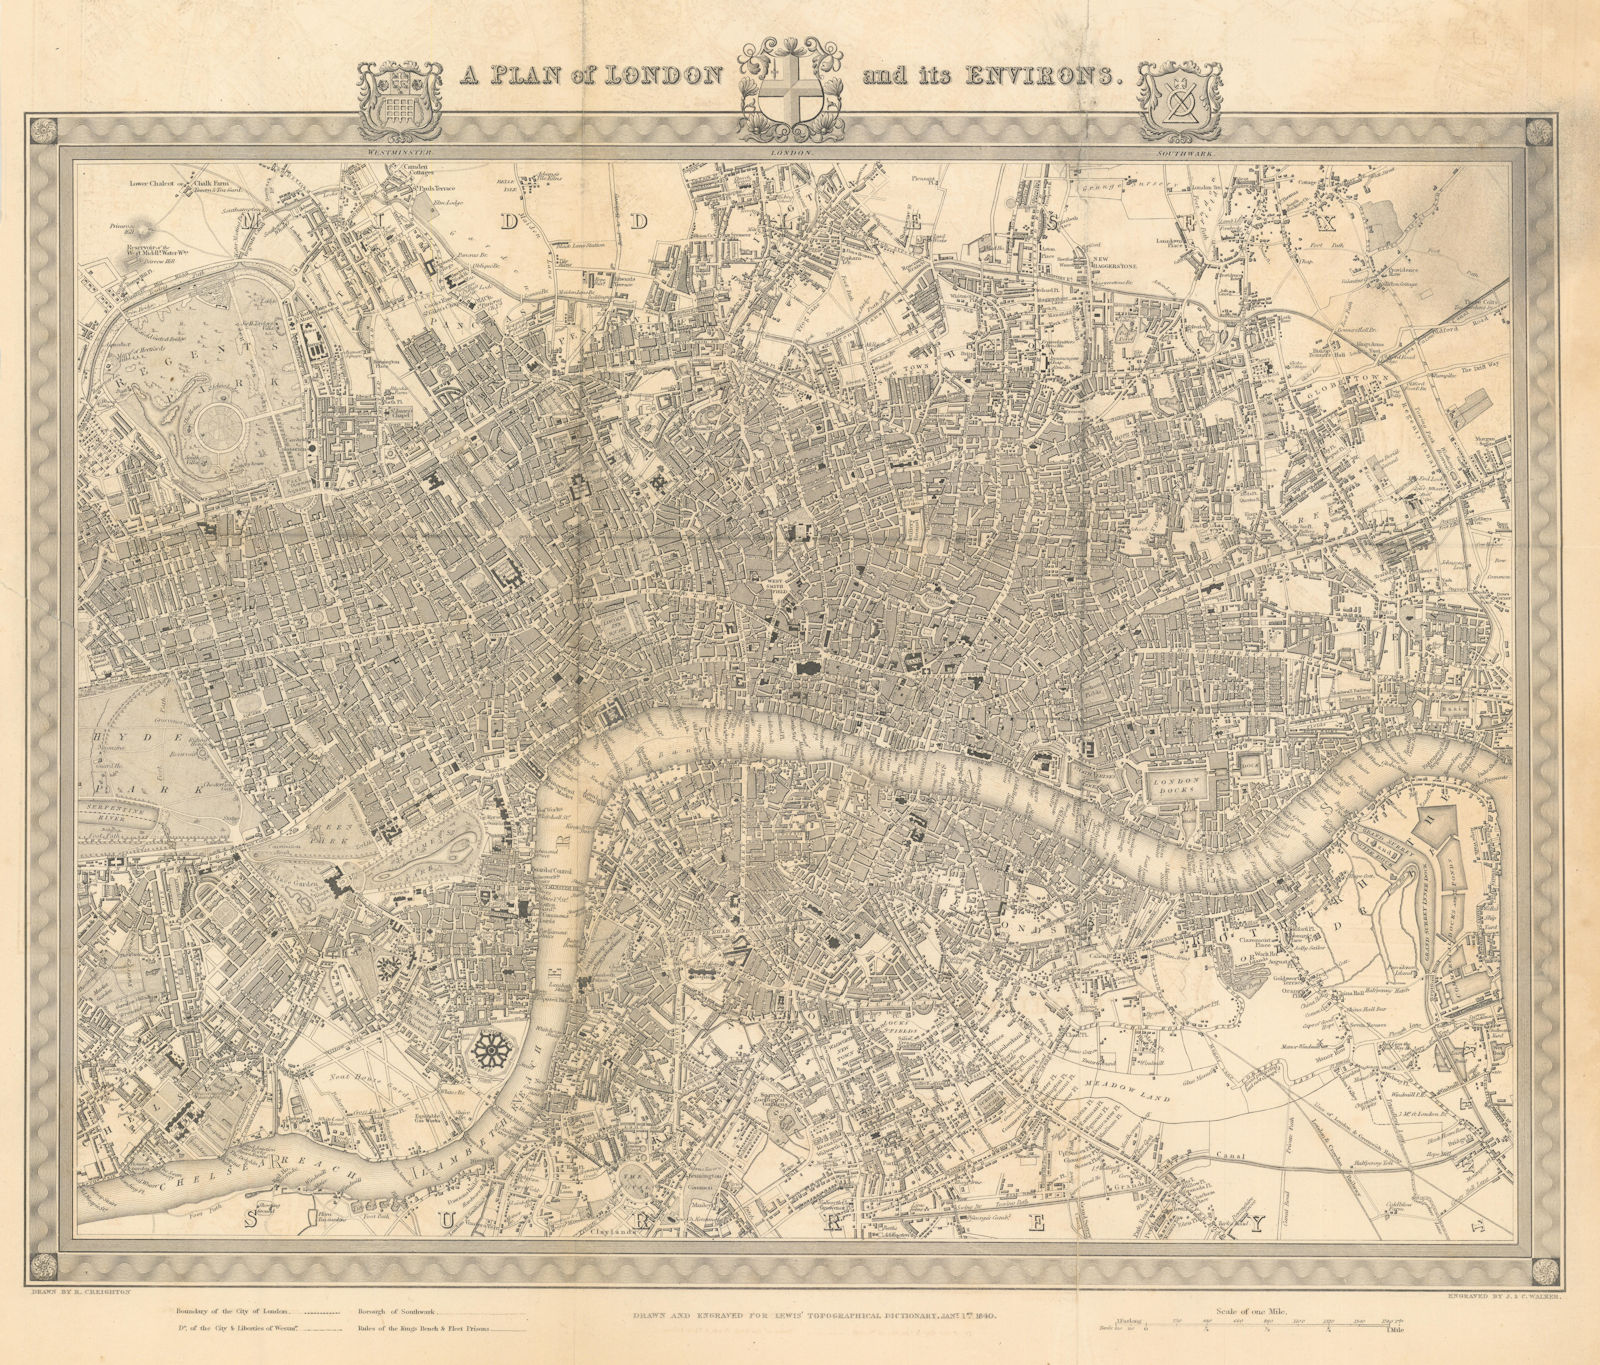 Associate Product "A plan of London and its environs" by WALKER and CREIGHTON for LEWIS c1840 map